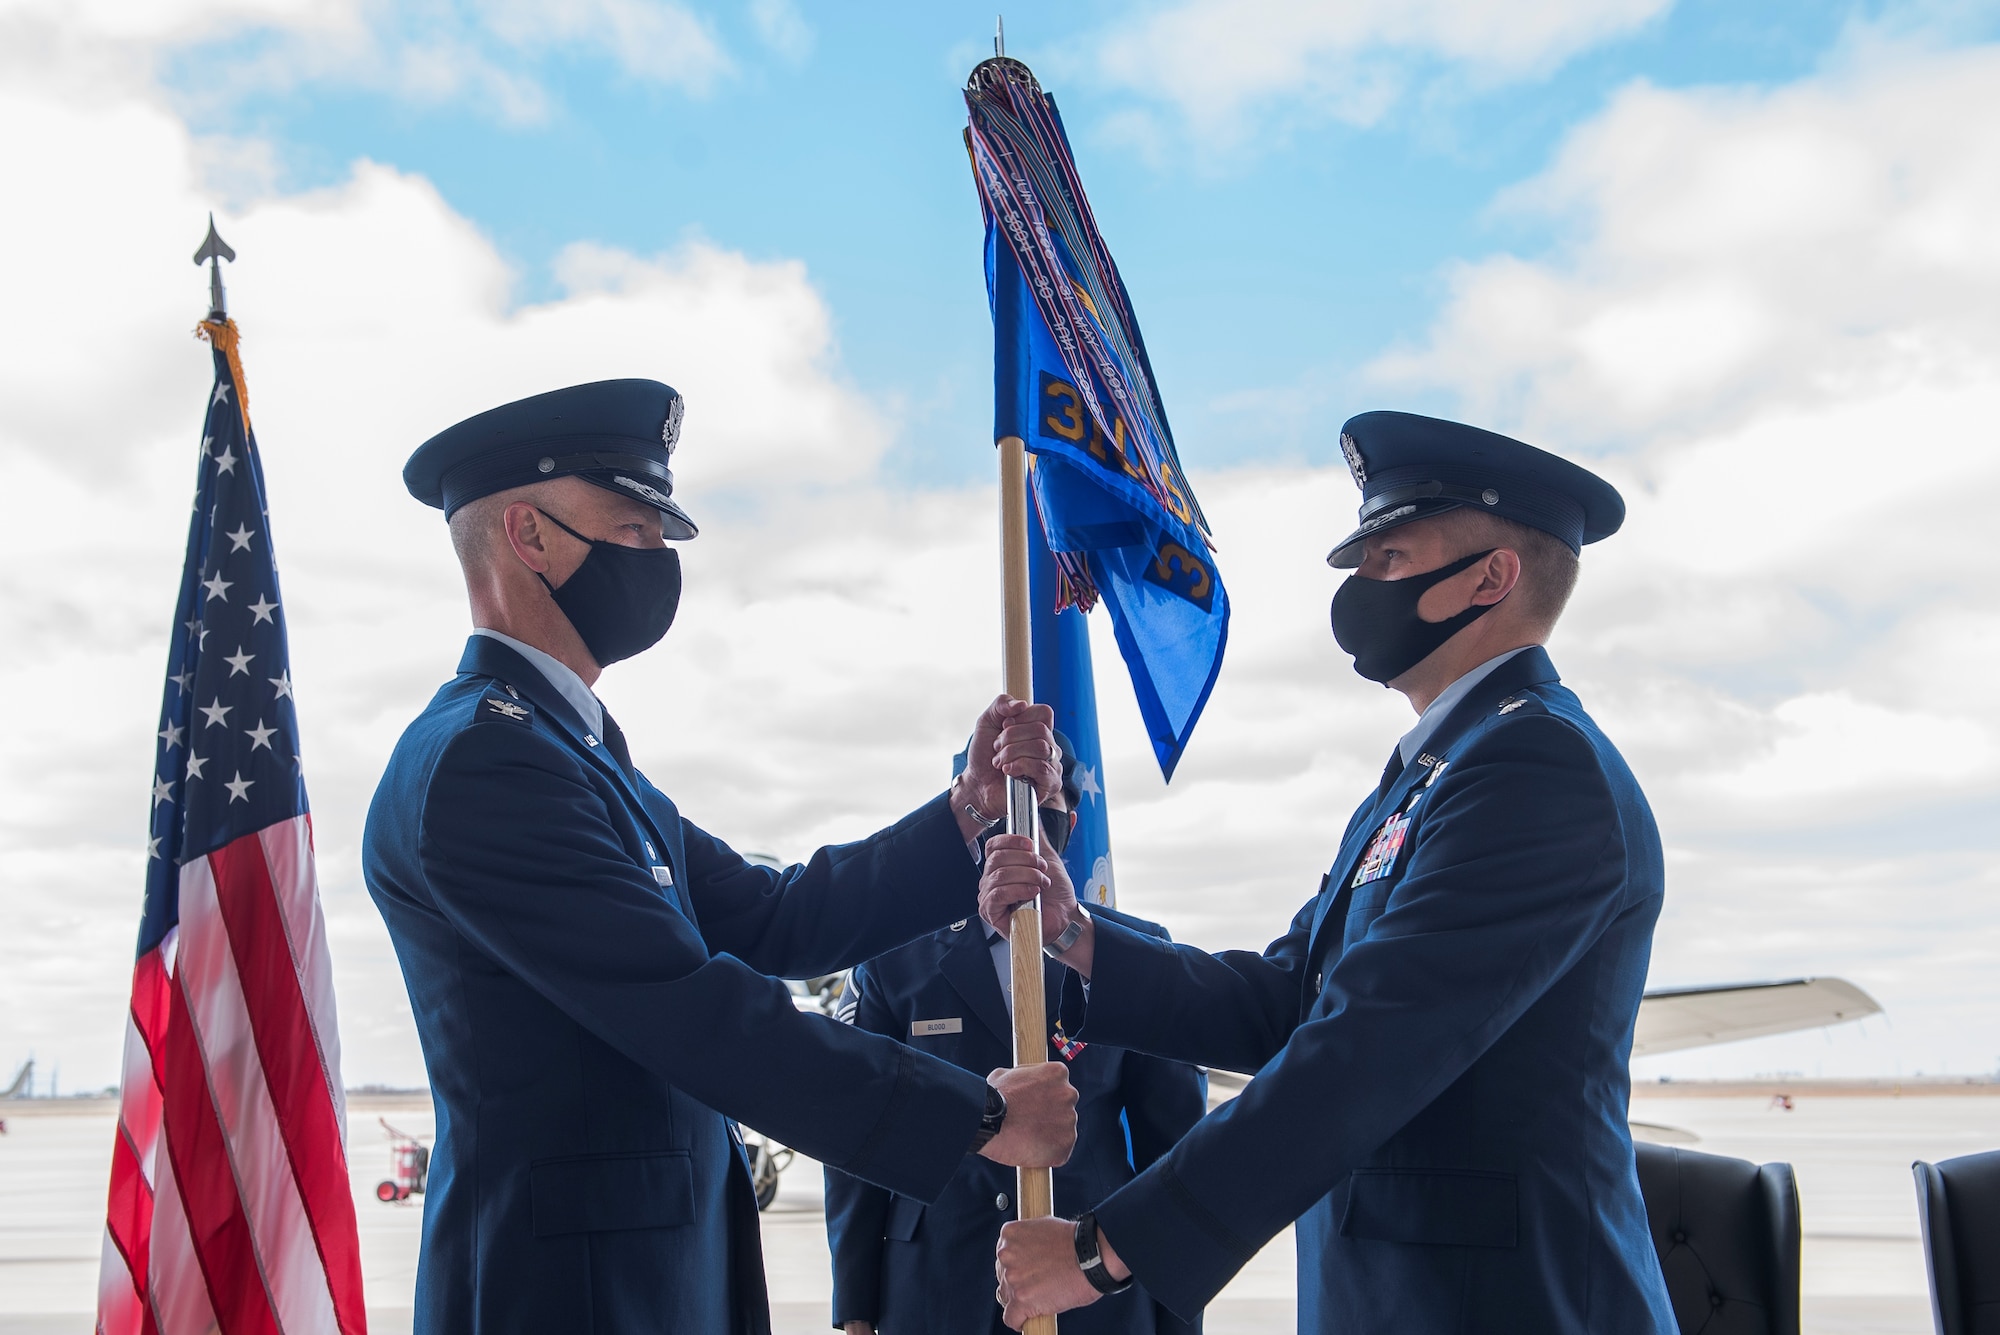 Air Force Col. Michael Shreves (left), 27th Special Operations Group commander, passes the guidon to Air Force Lt. Col. Joshua Stinson (right), 310th Special Operations Squadron commander, at the 310 SOS activation ceremony at Cannon Air Force Base, N.M., May 4, 2021. The 310 SOS was activated recently to align with the Air Force Special Operations Command’s new deployment plans, providing a more sustainable and predictable deployment cycle to allow Air Commandos more time at home station to develop themselves and the culture of the squadron. (U.S. Air Force photo by Senior Airman Vernon R. Walter III)